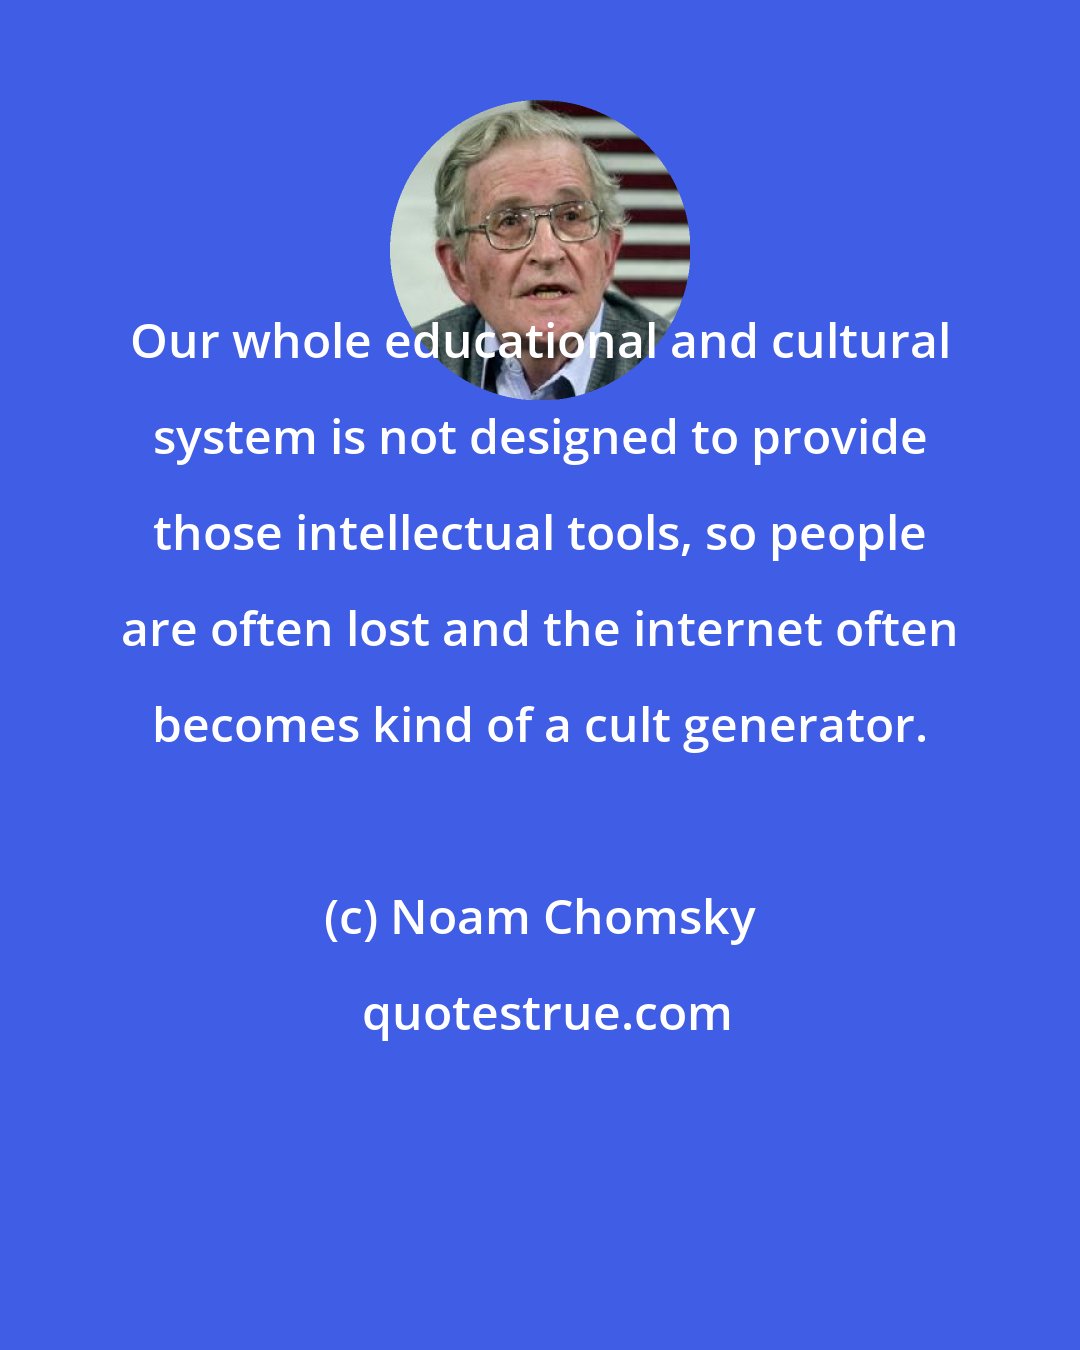 Noam Chomsky: Our whole educational and cultural system is not designed to provide those intellectual tools, so people are often lost and the internet often becomes kind of a cult generator.